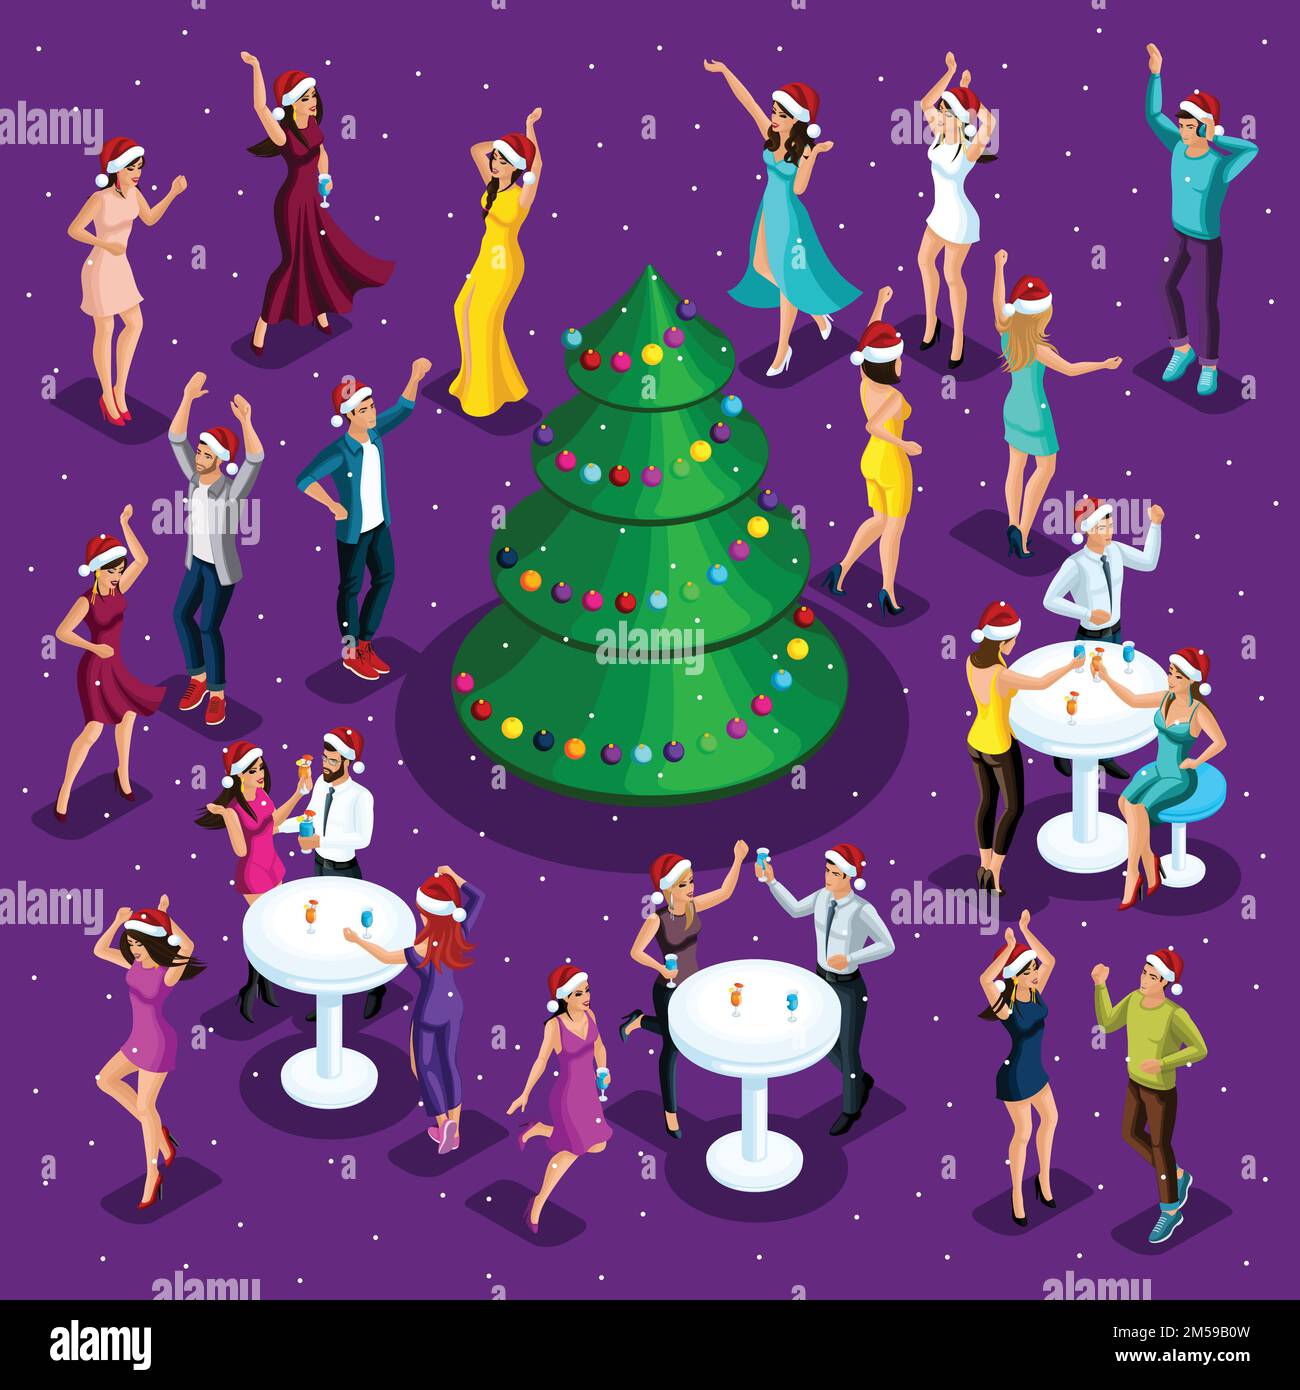 Isometric celebration of Christmas, 3d dancing, happiness of a man and a woman are having fun, festive Christmas tree in the center, corporate party, Stock Vector